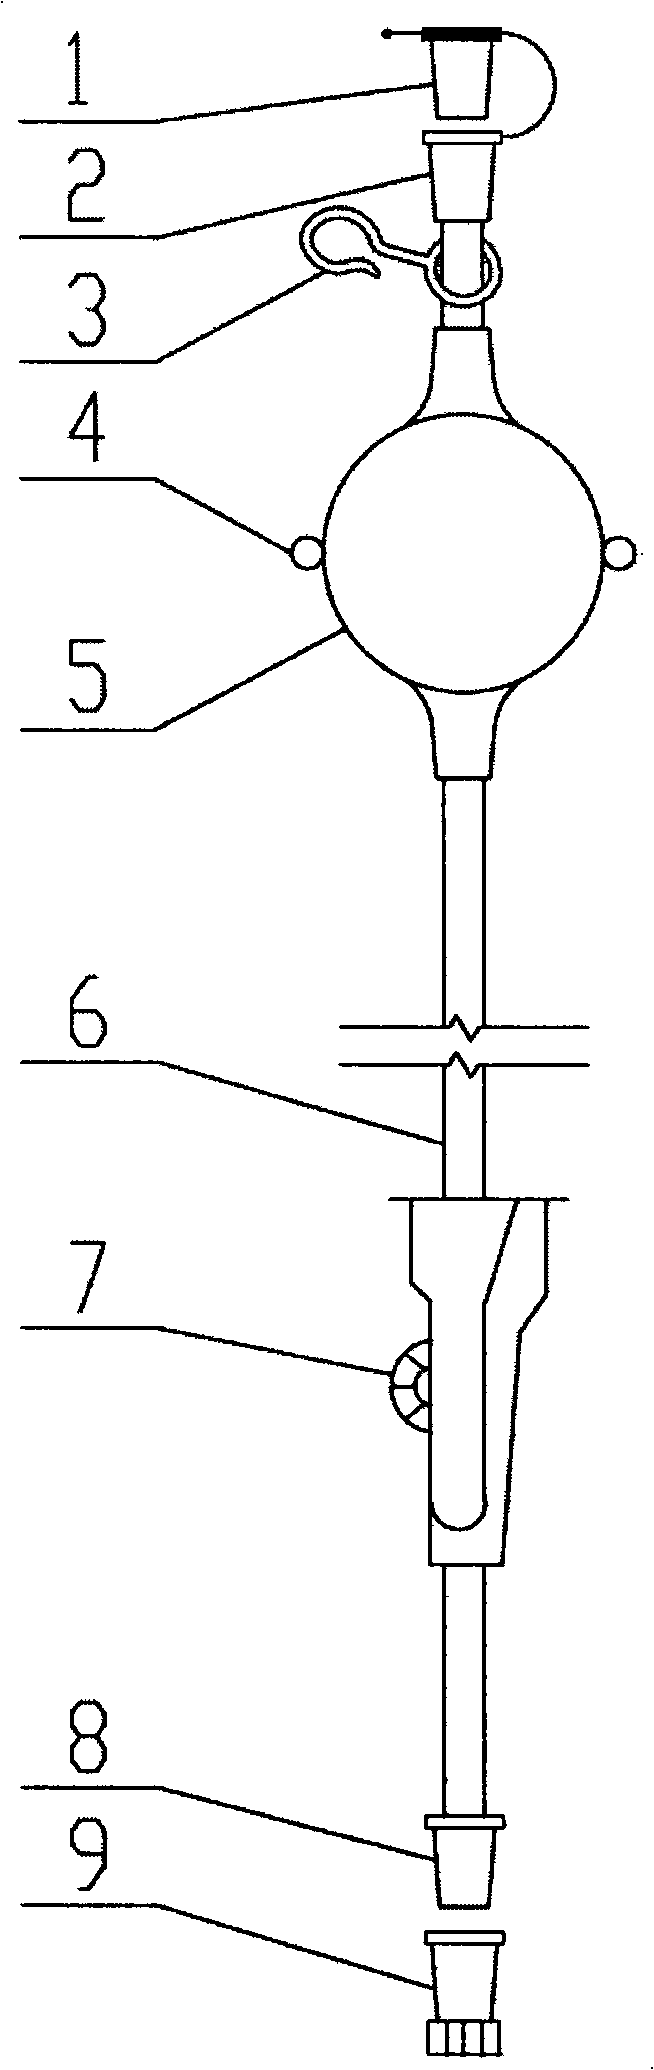 Closed-type air remover for disposable transfusion apparatus/blood transfusion apparatus